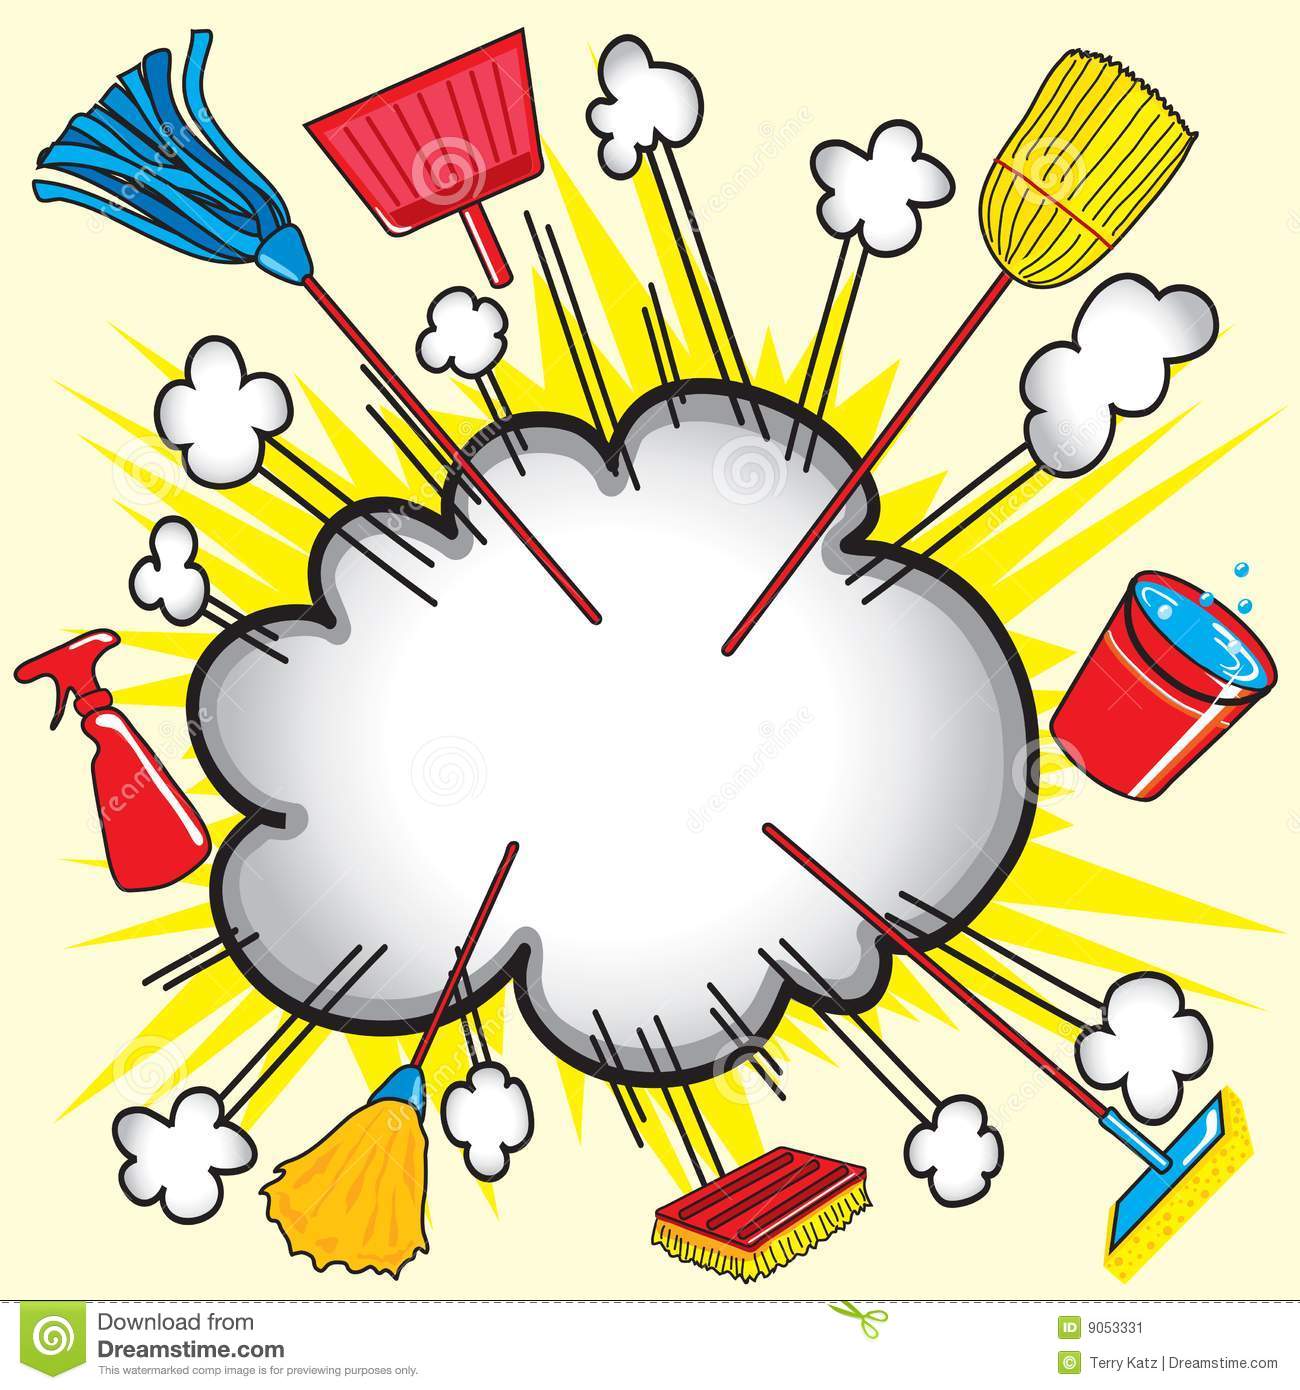 Cloud Burst Explosion With Cleaning Equipment For Business Or